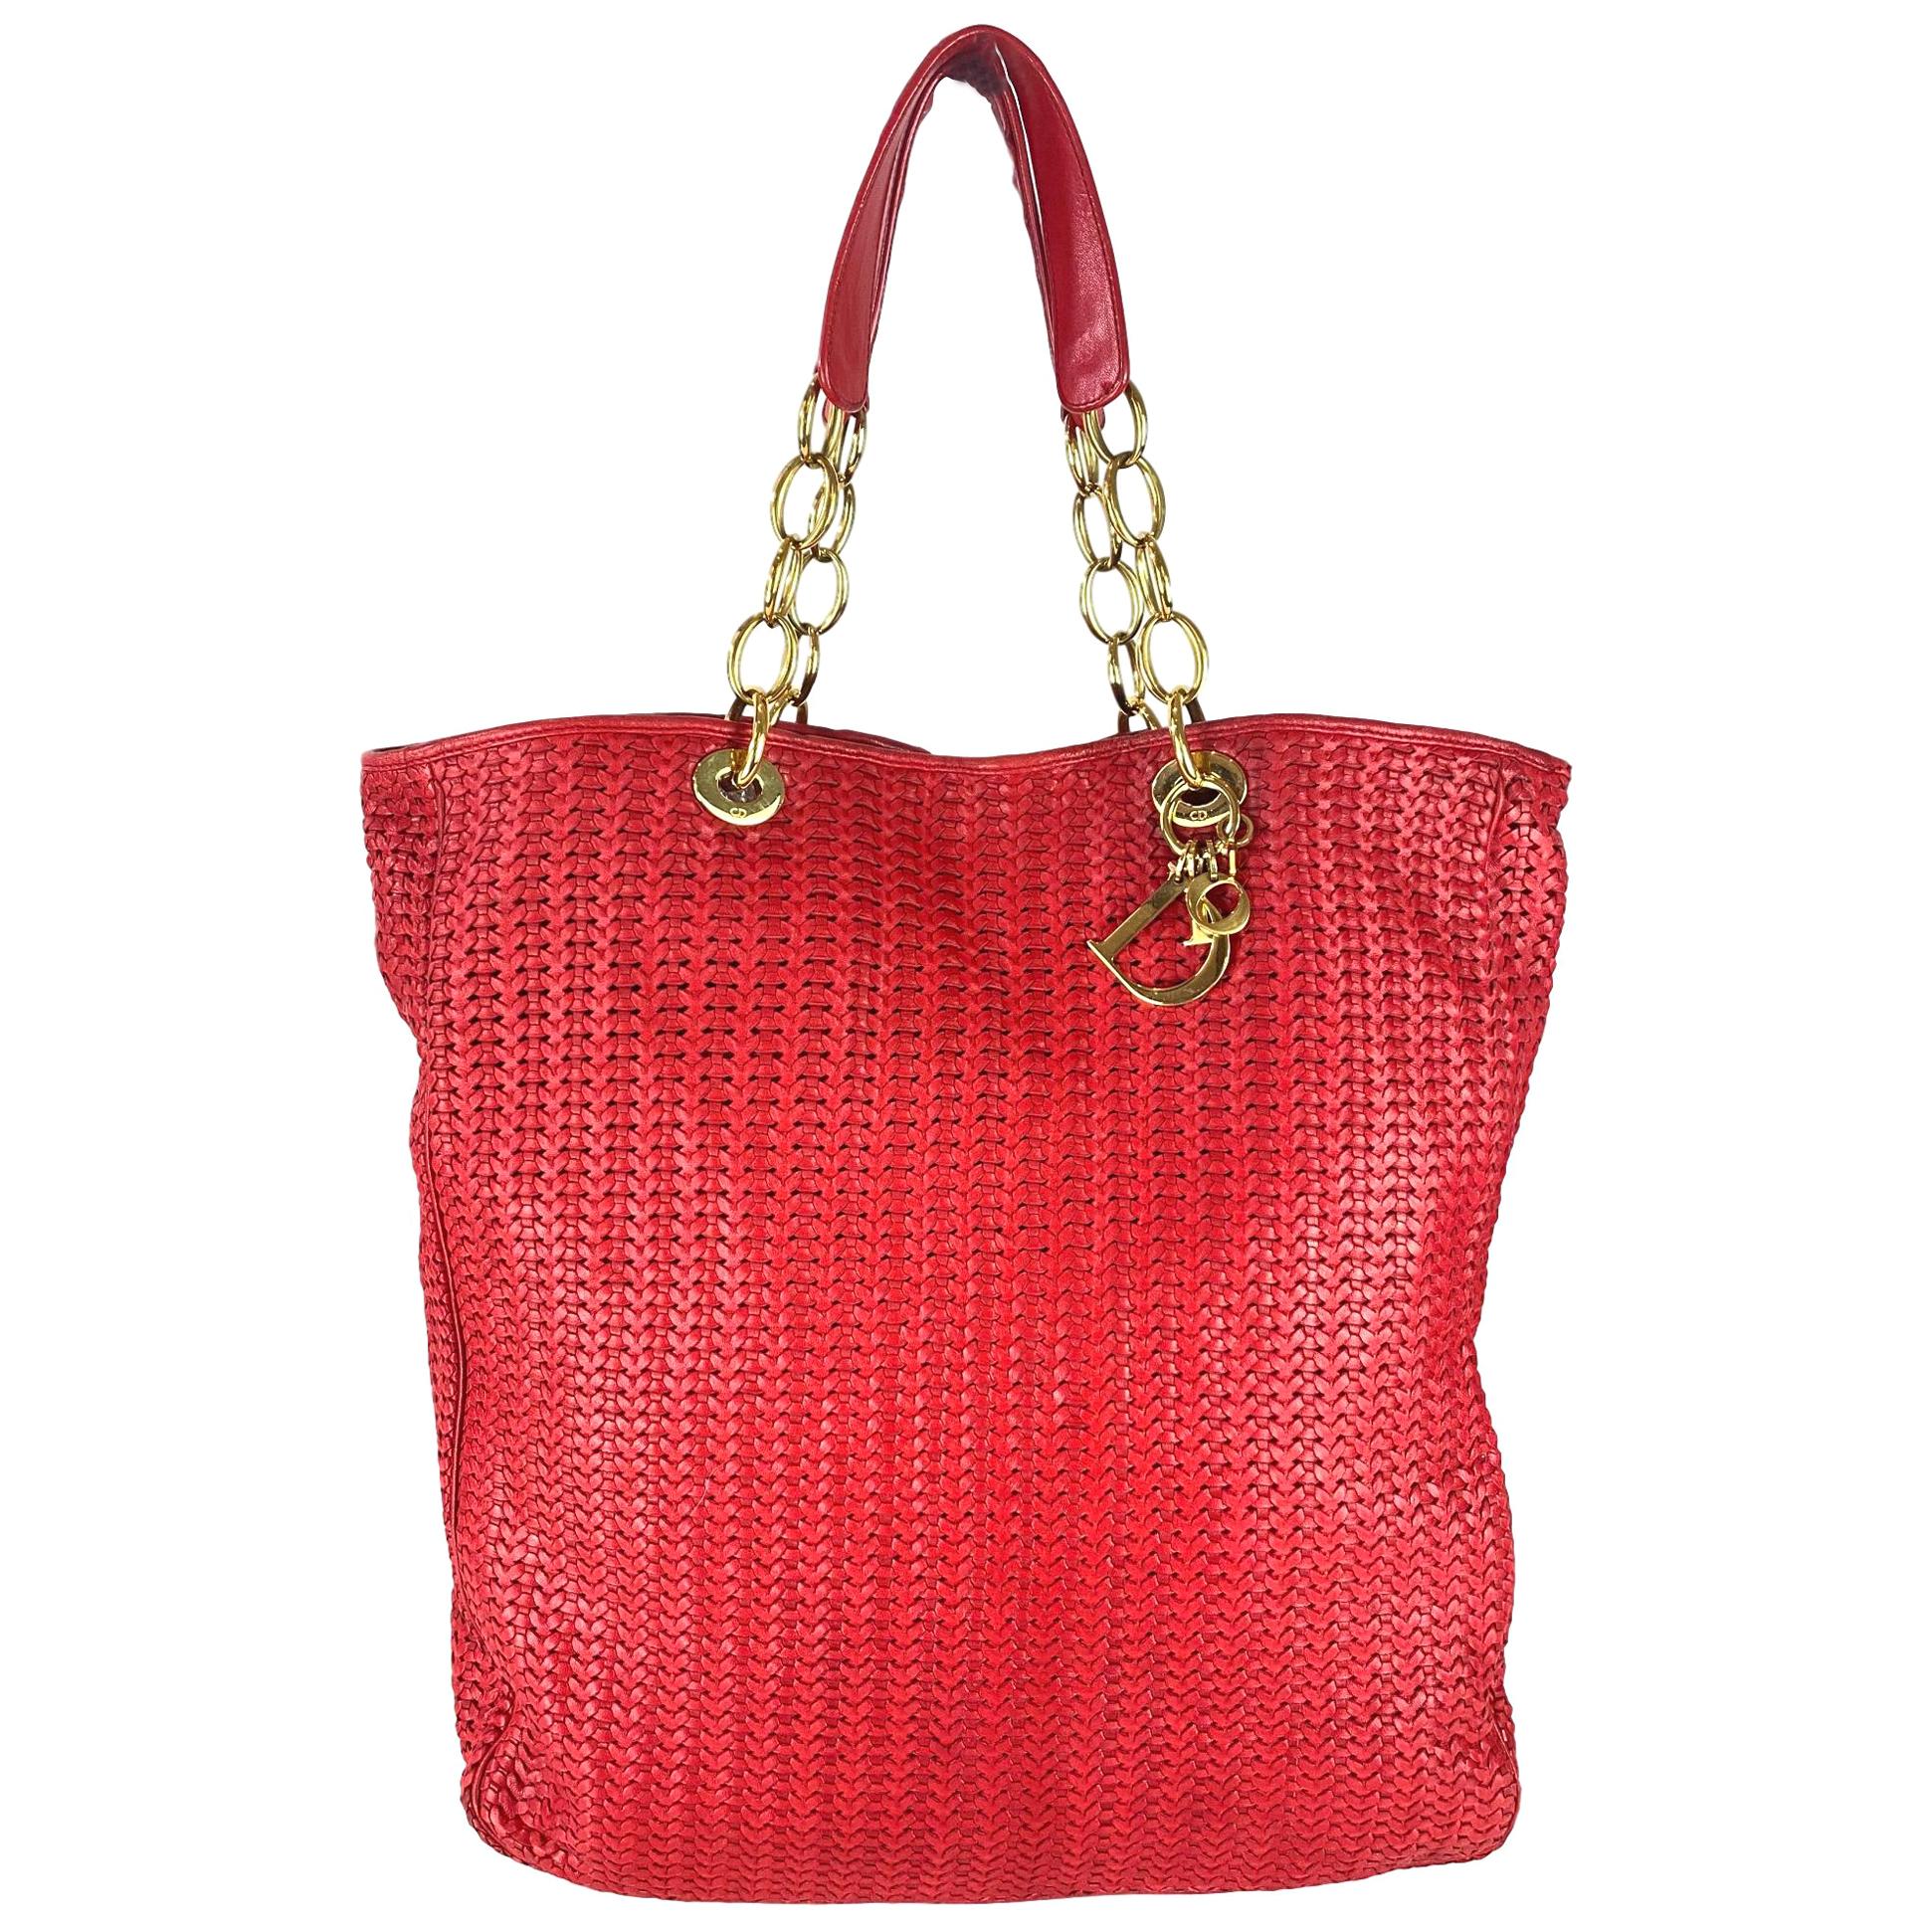 Christian Dior Red Woven Leather Soft Large Tote Bag